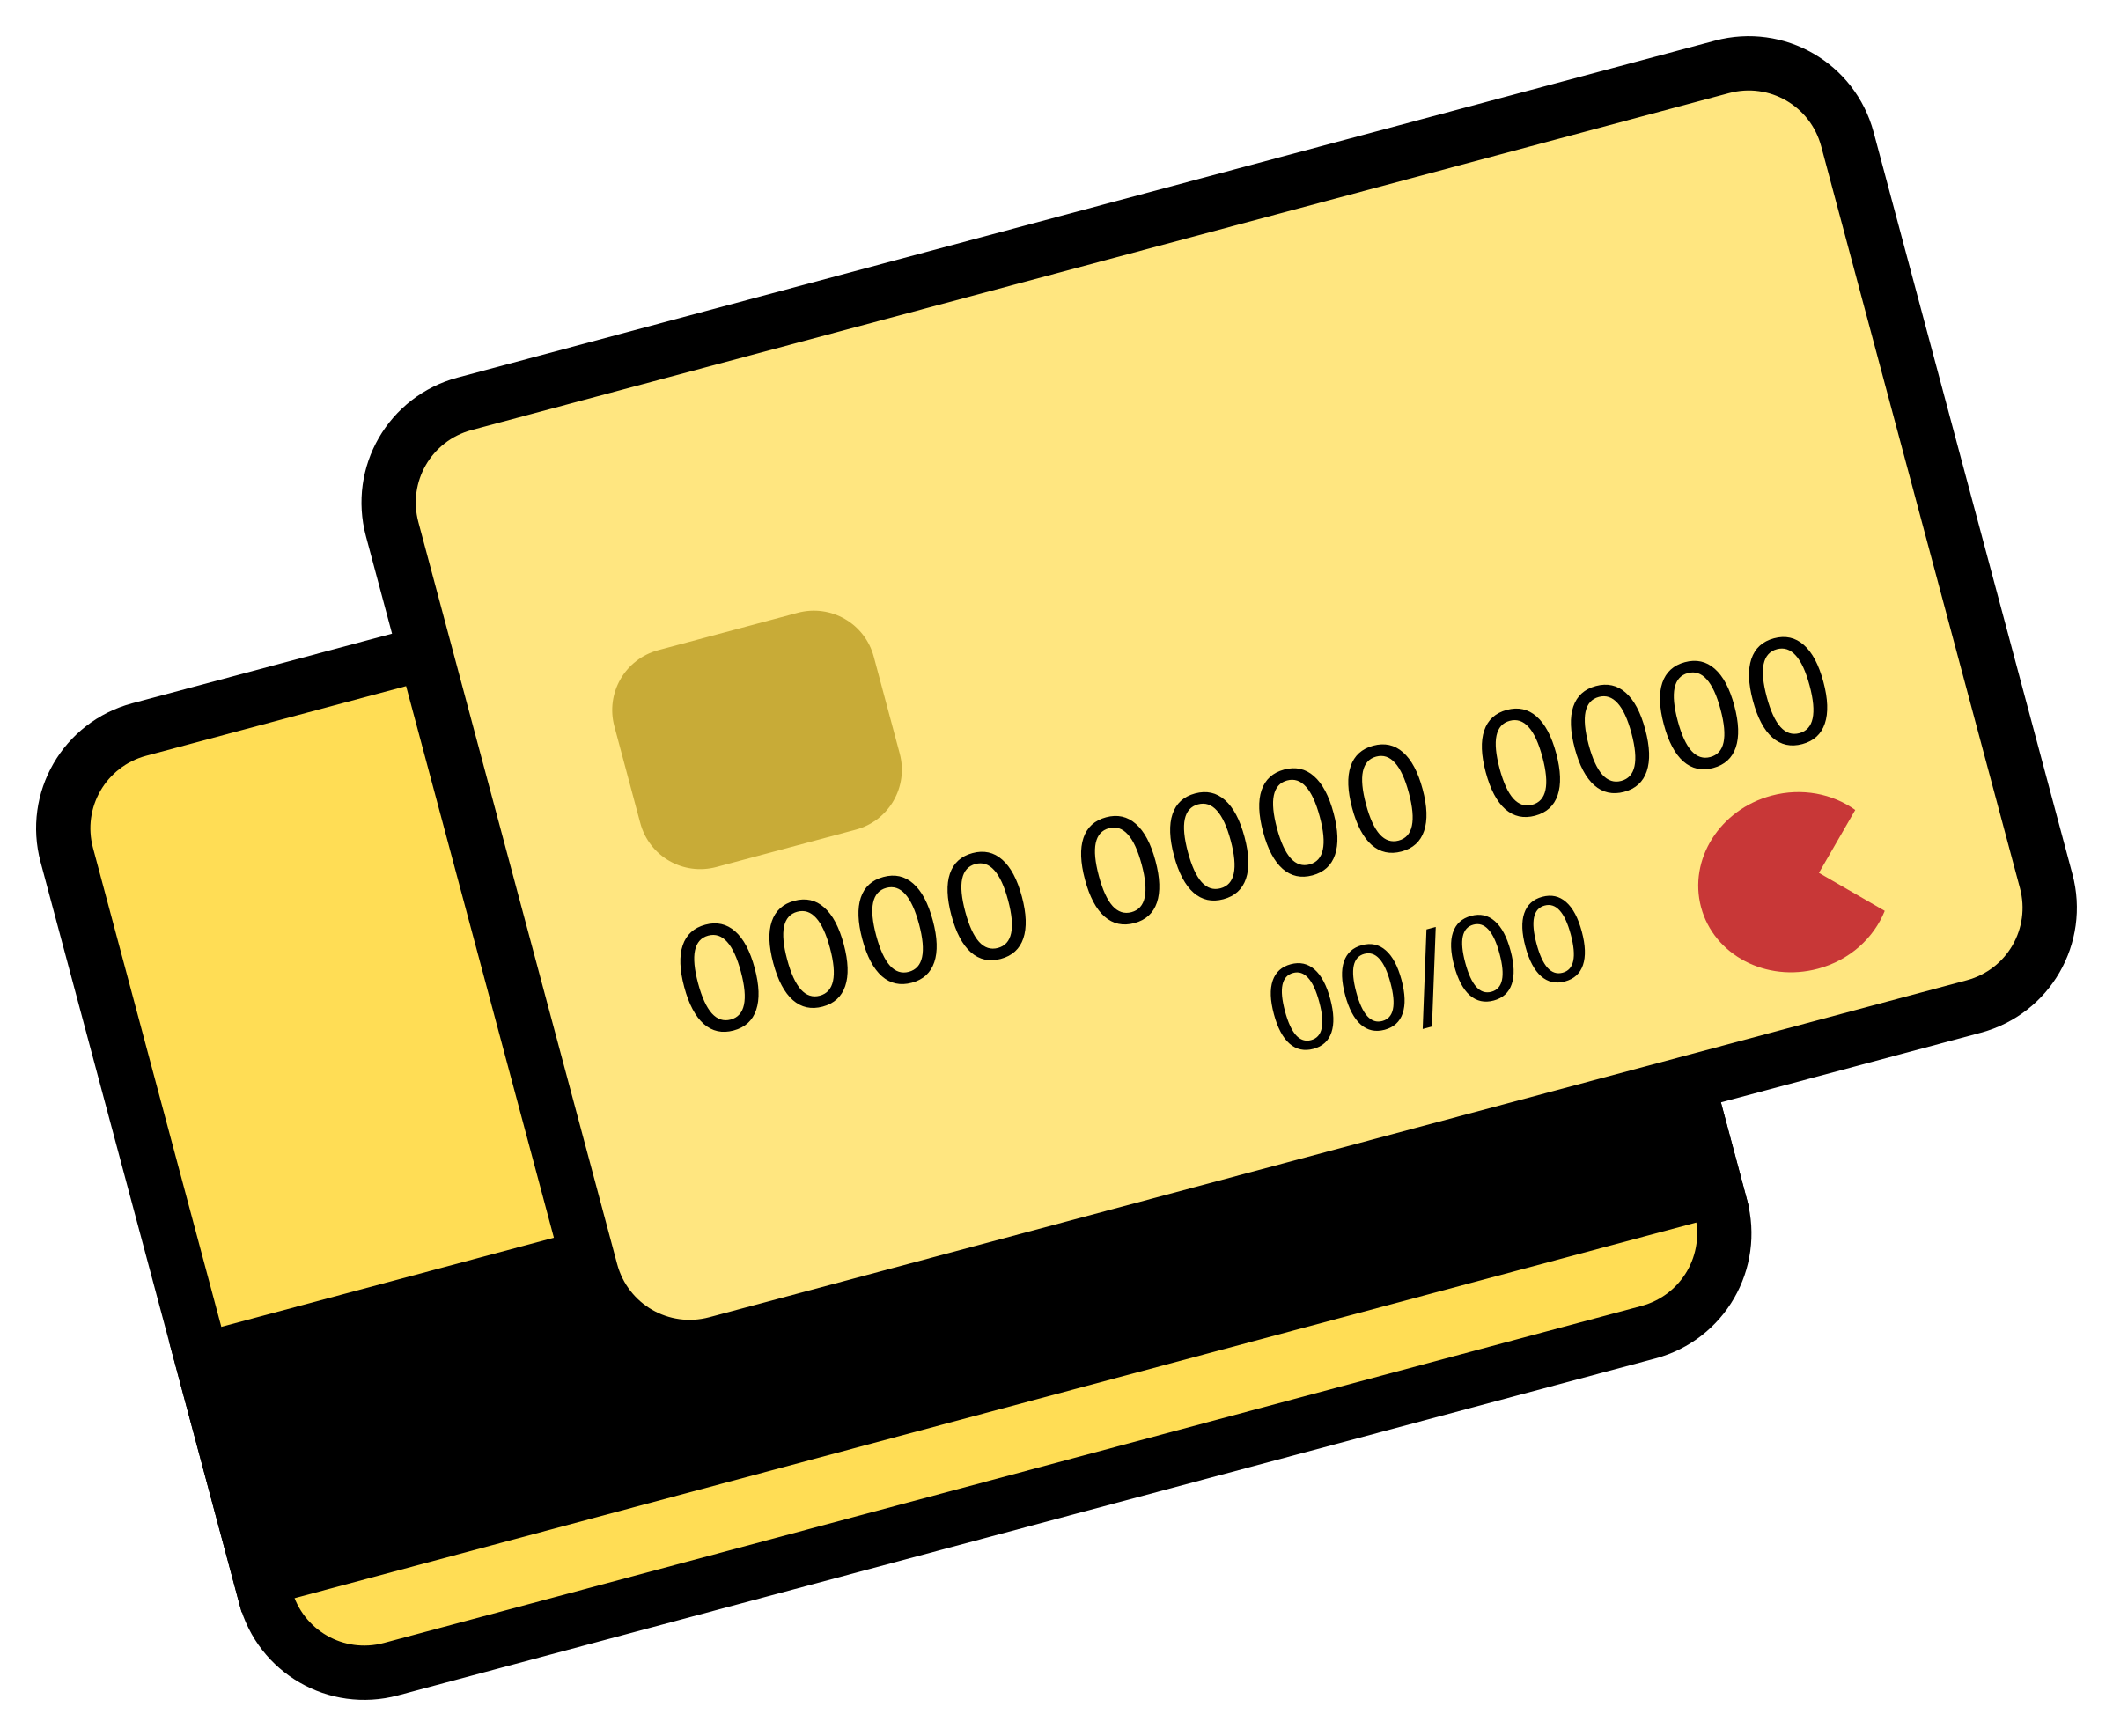 Credit Card Vector Graphics image Free stock photo